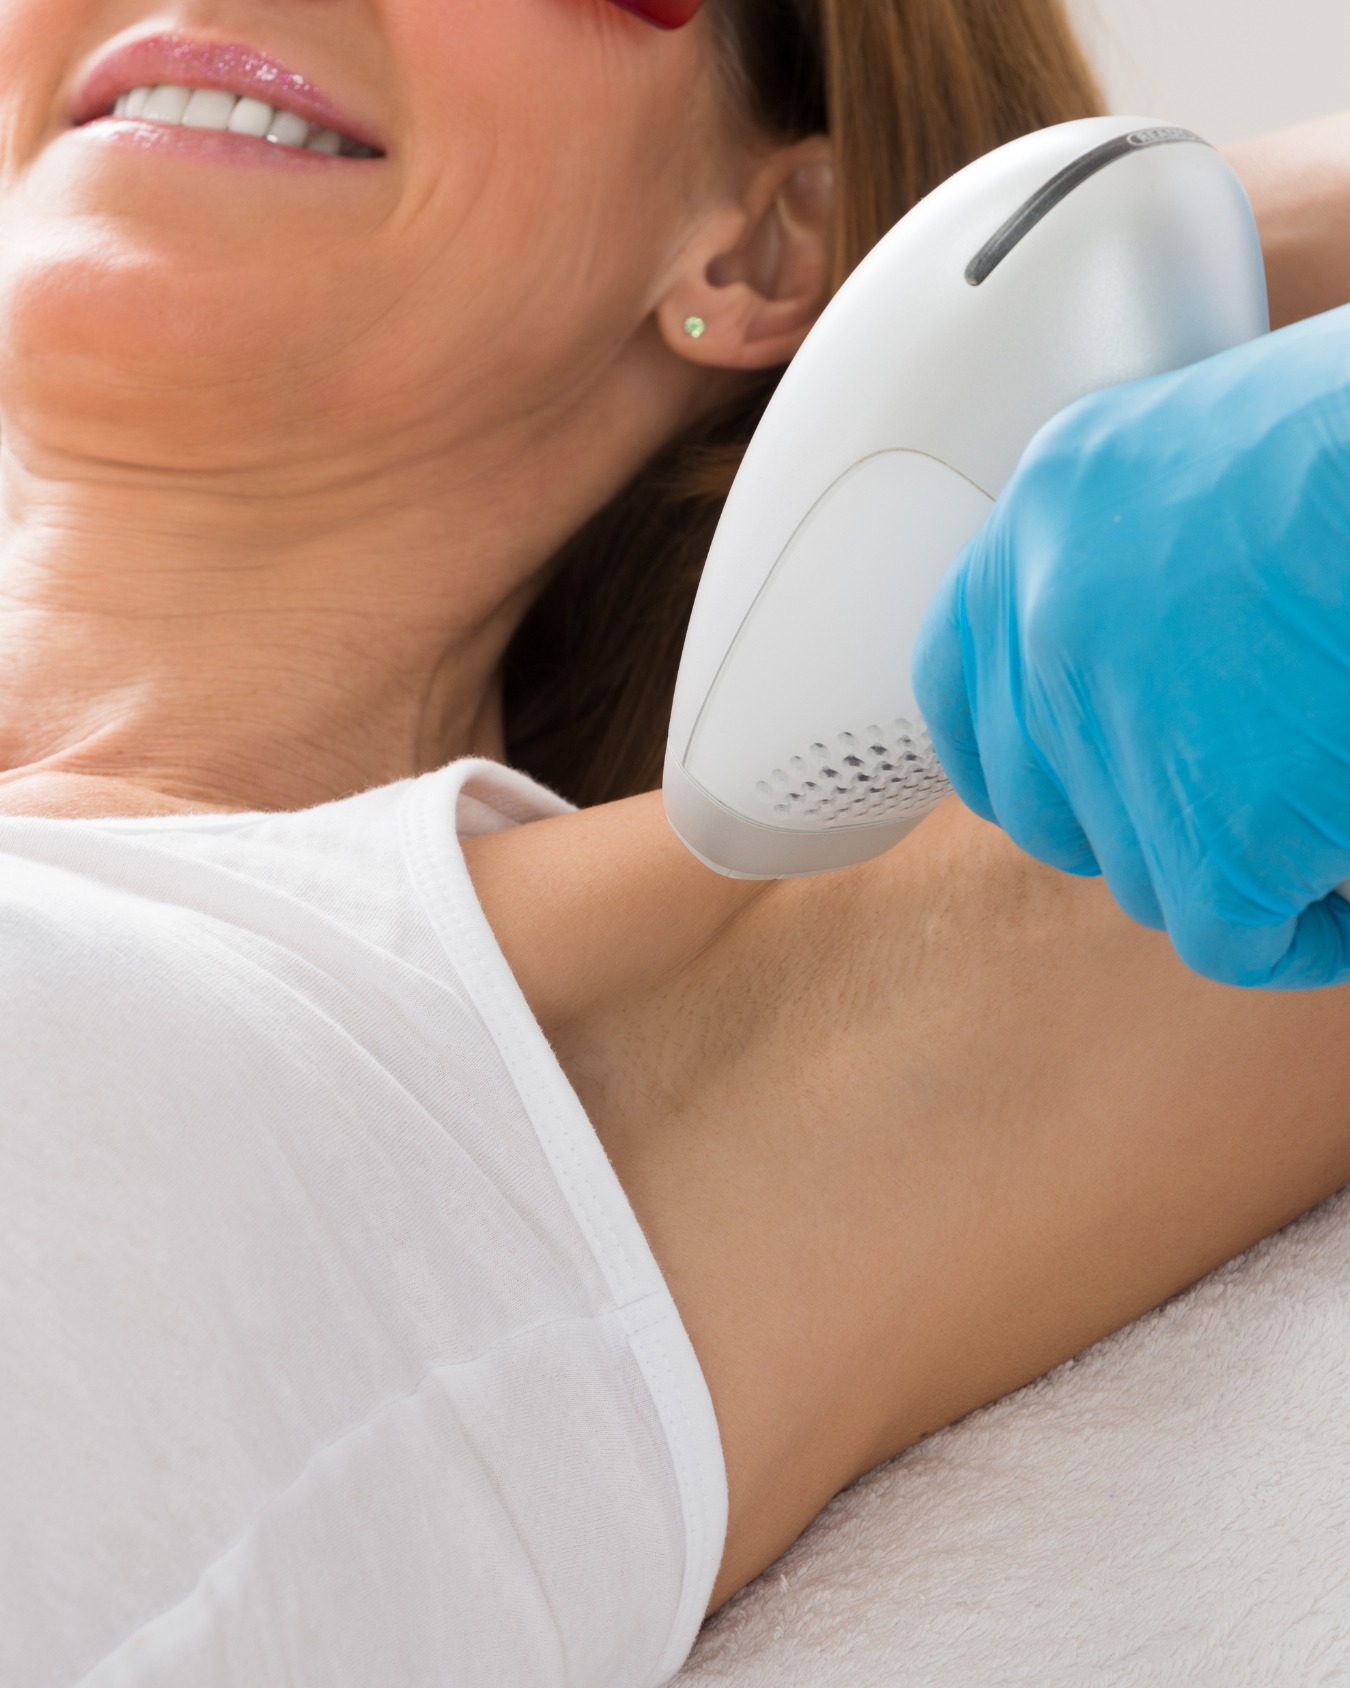 Laser Hair Removal Venice, FL: What to Expect During Your First Session